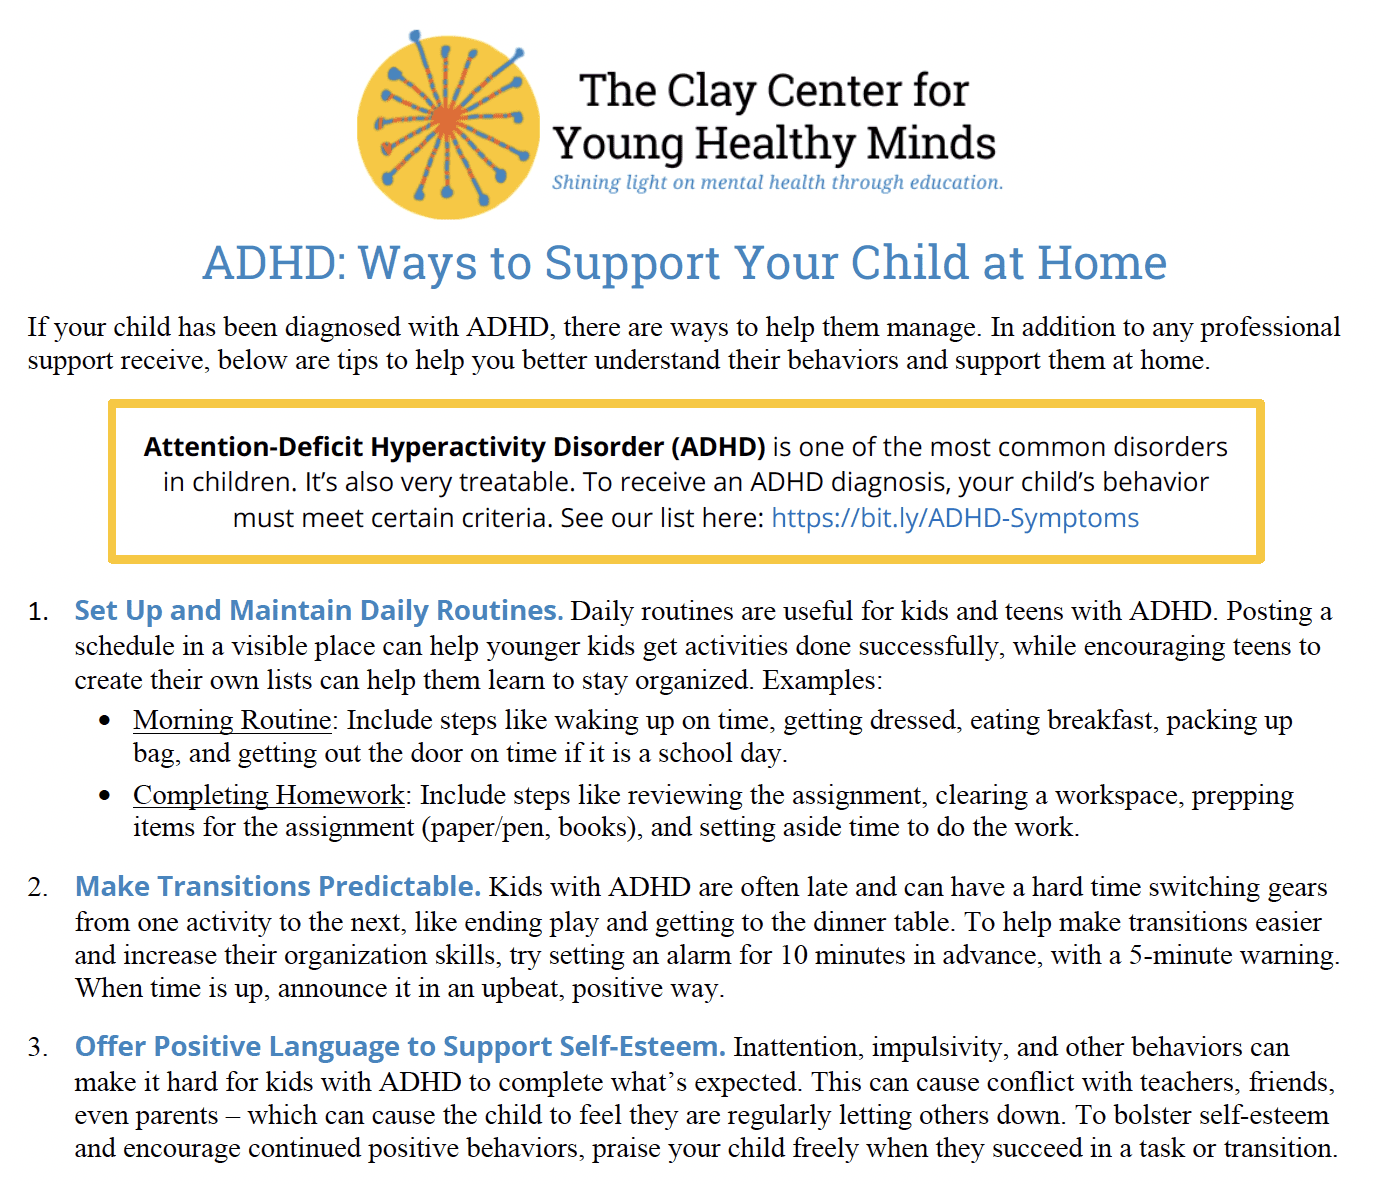 screenshot of our PDF on ADHD: Ways to Support Your Child at Home. Find full document here: https://www.mghclaycenter.org/assets/ADHD-PDF-Support-Your-Child-at-Home.pdf